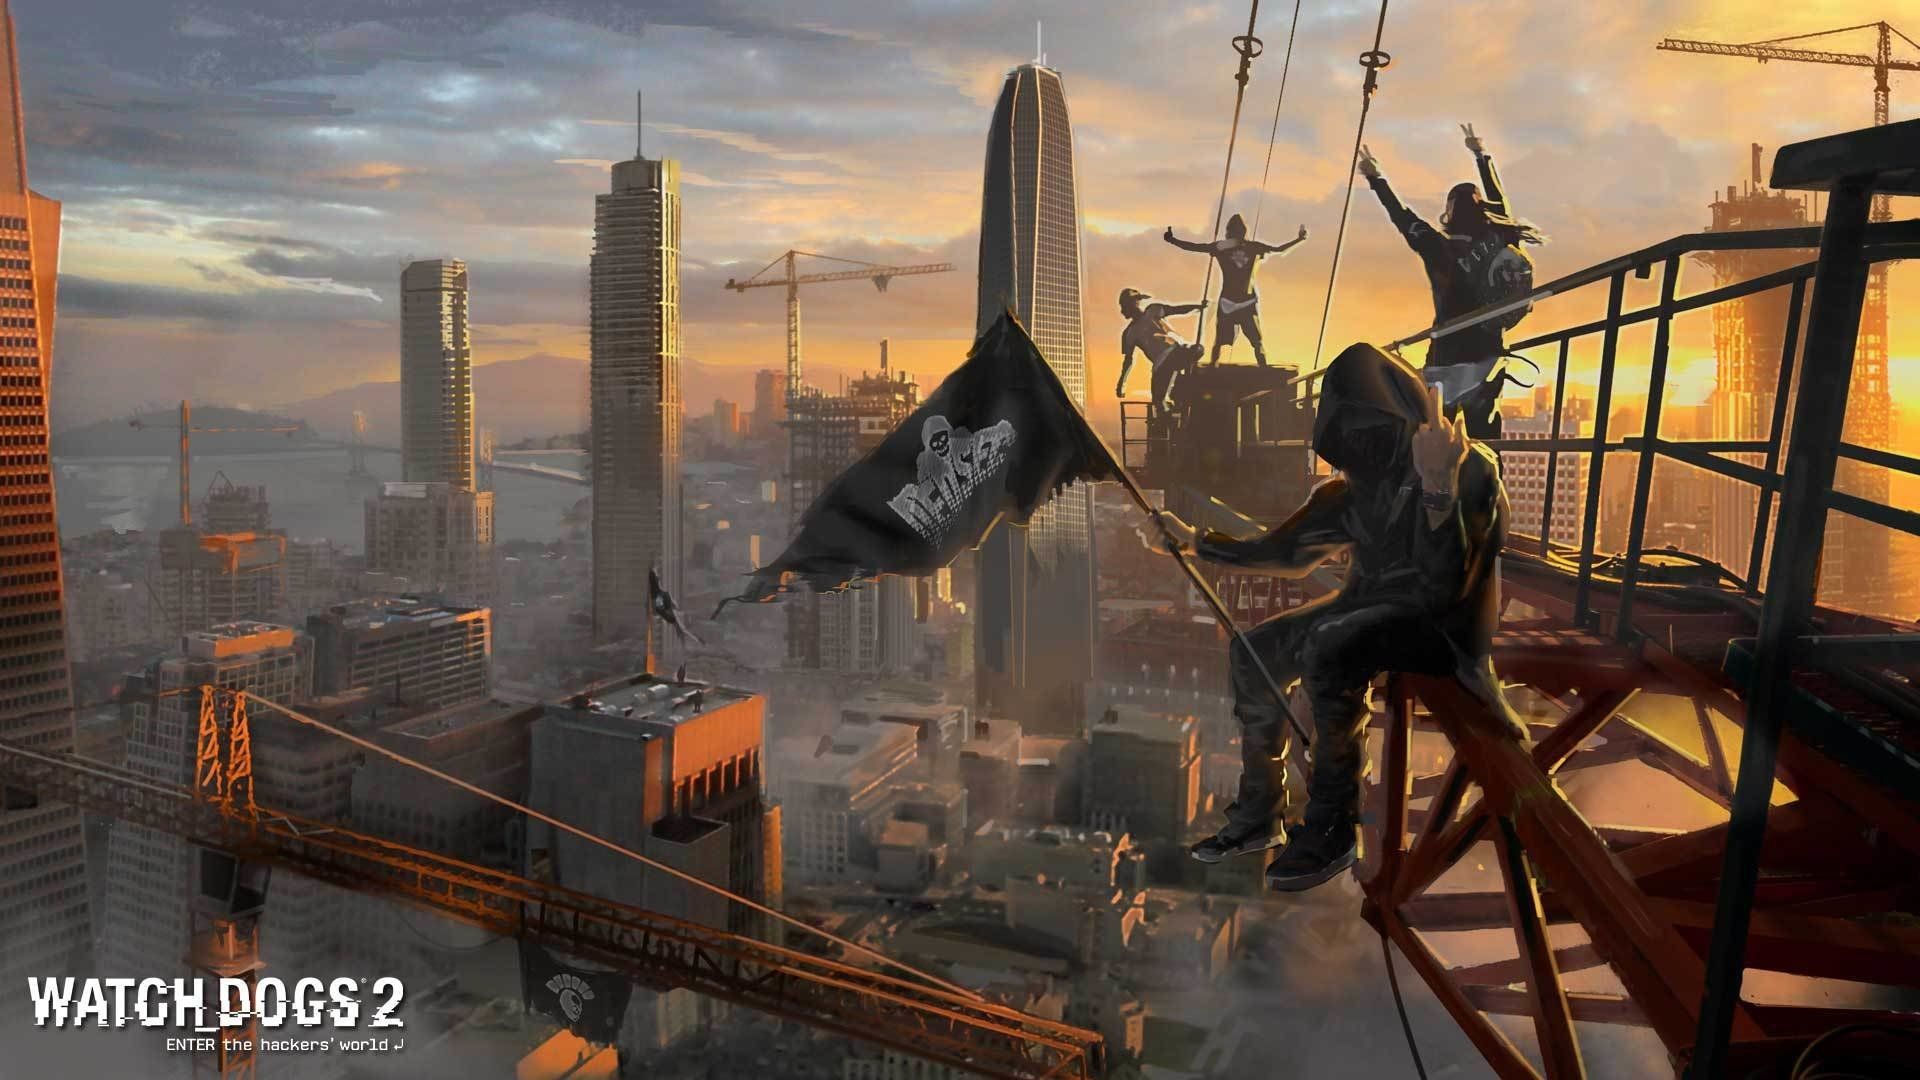 Video game watch dogs wallpaper watch dogs game watch dogs dog wallpaper